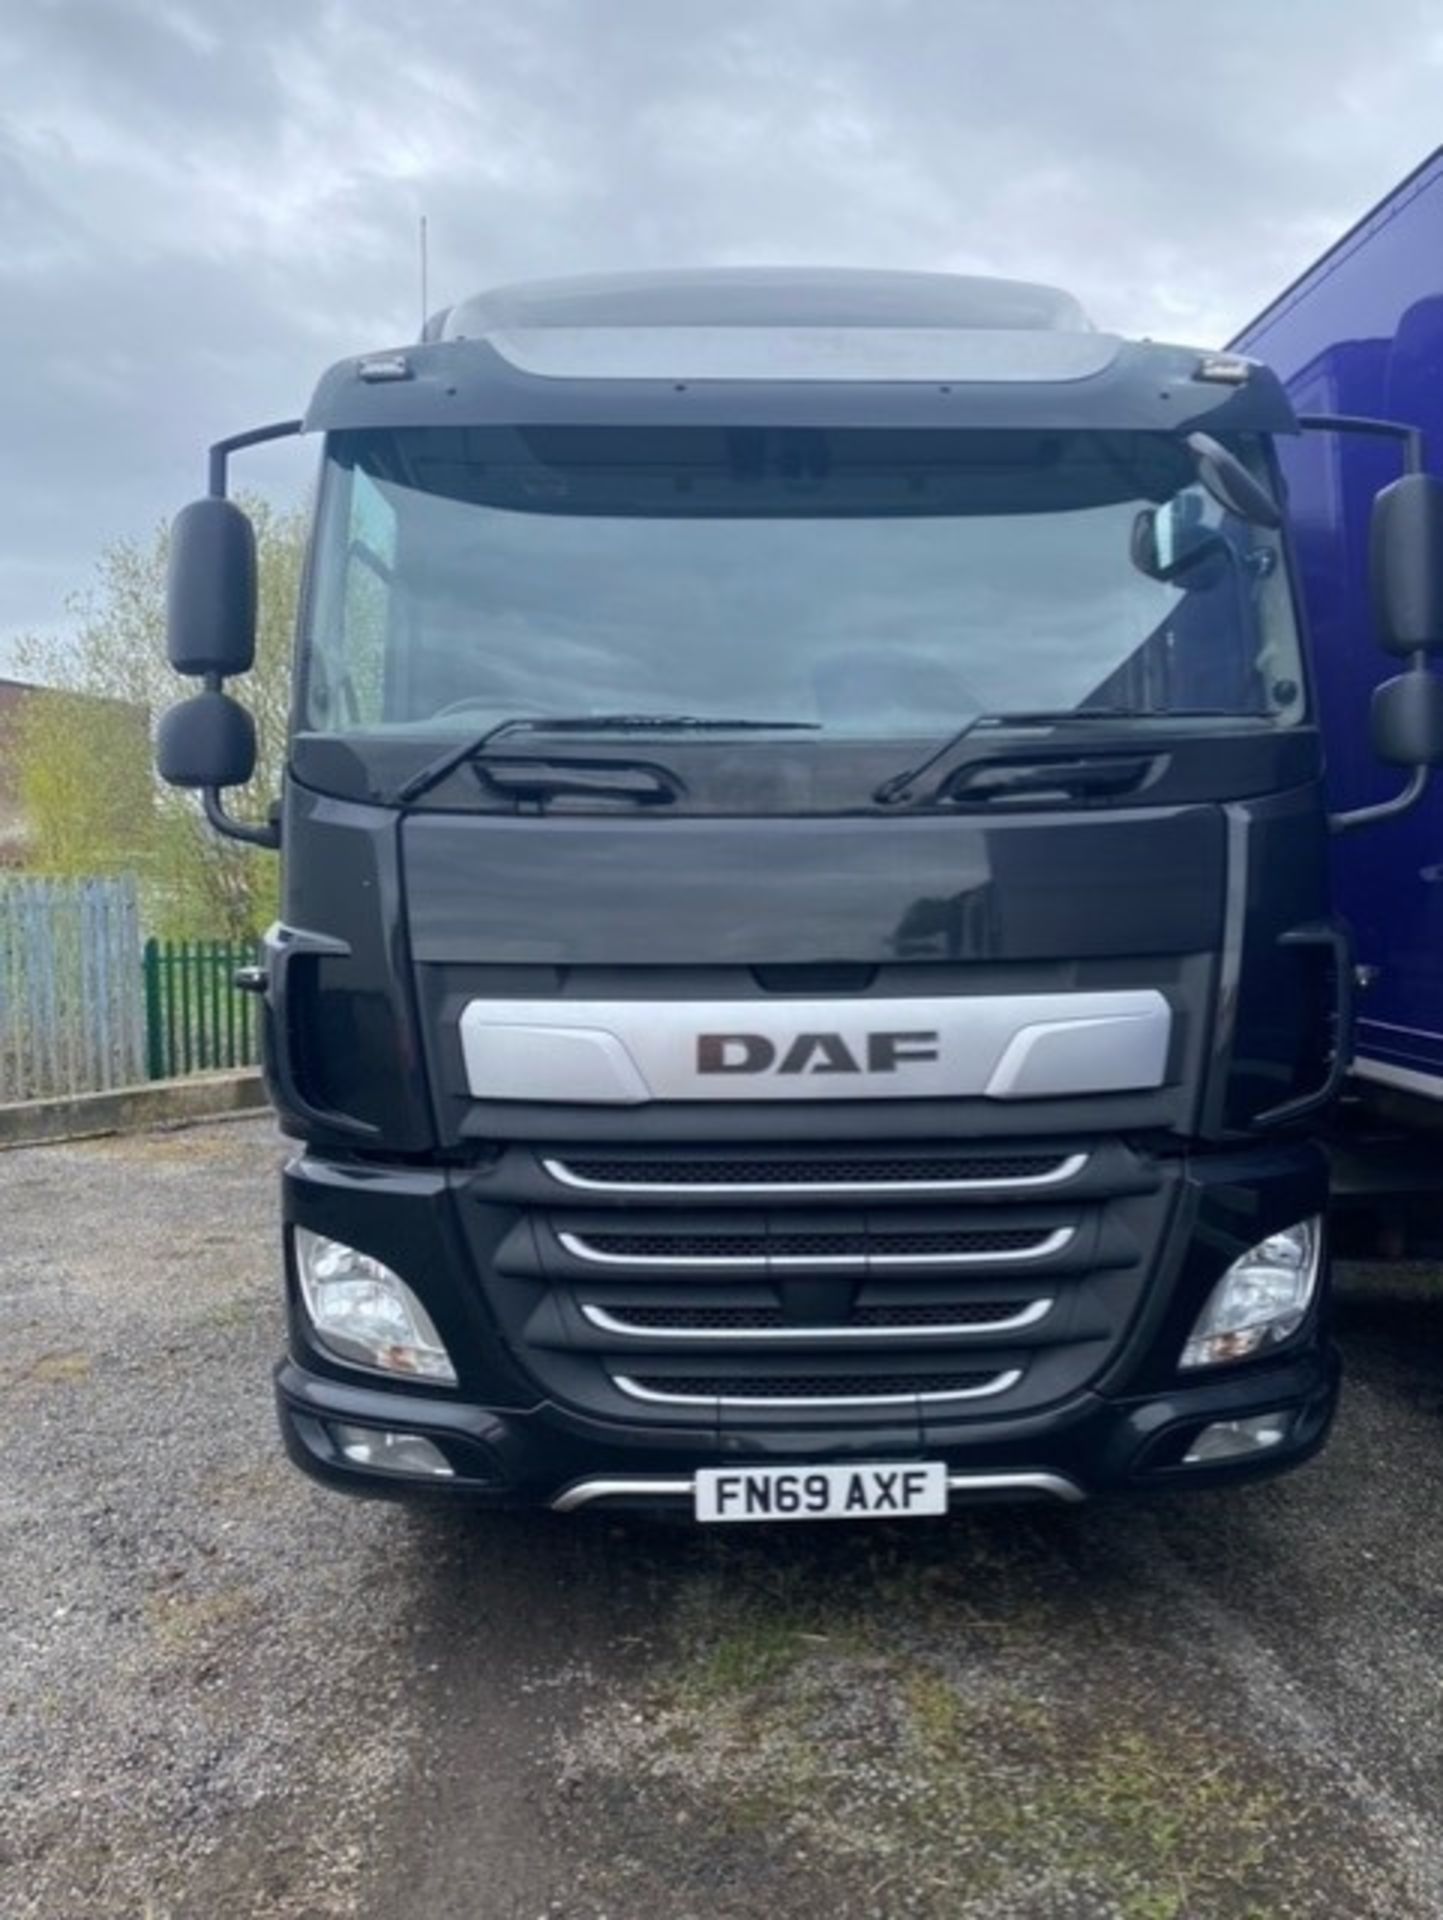 2019, DAF CF 260 FA - FN69 AXF (18 Ton Rigid Truck with Tail Lift) - Image 7 of 8